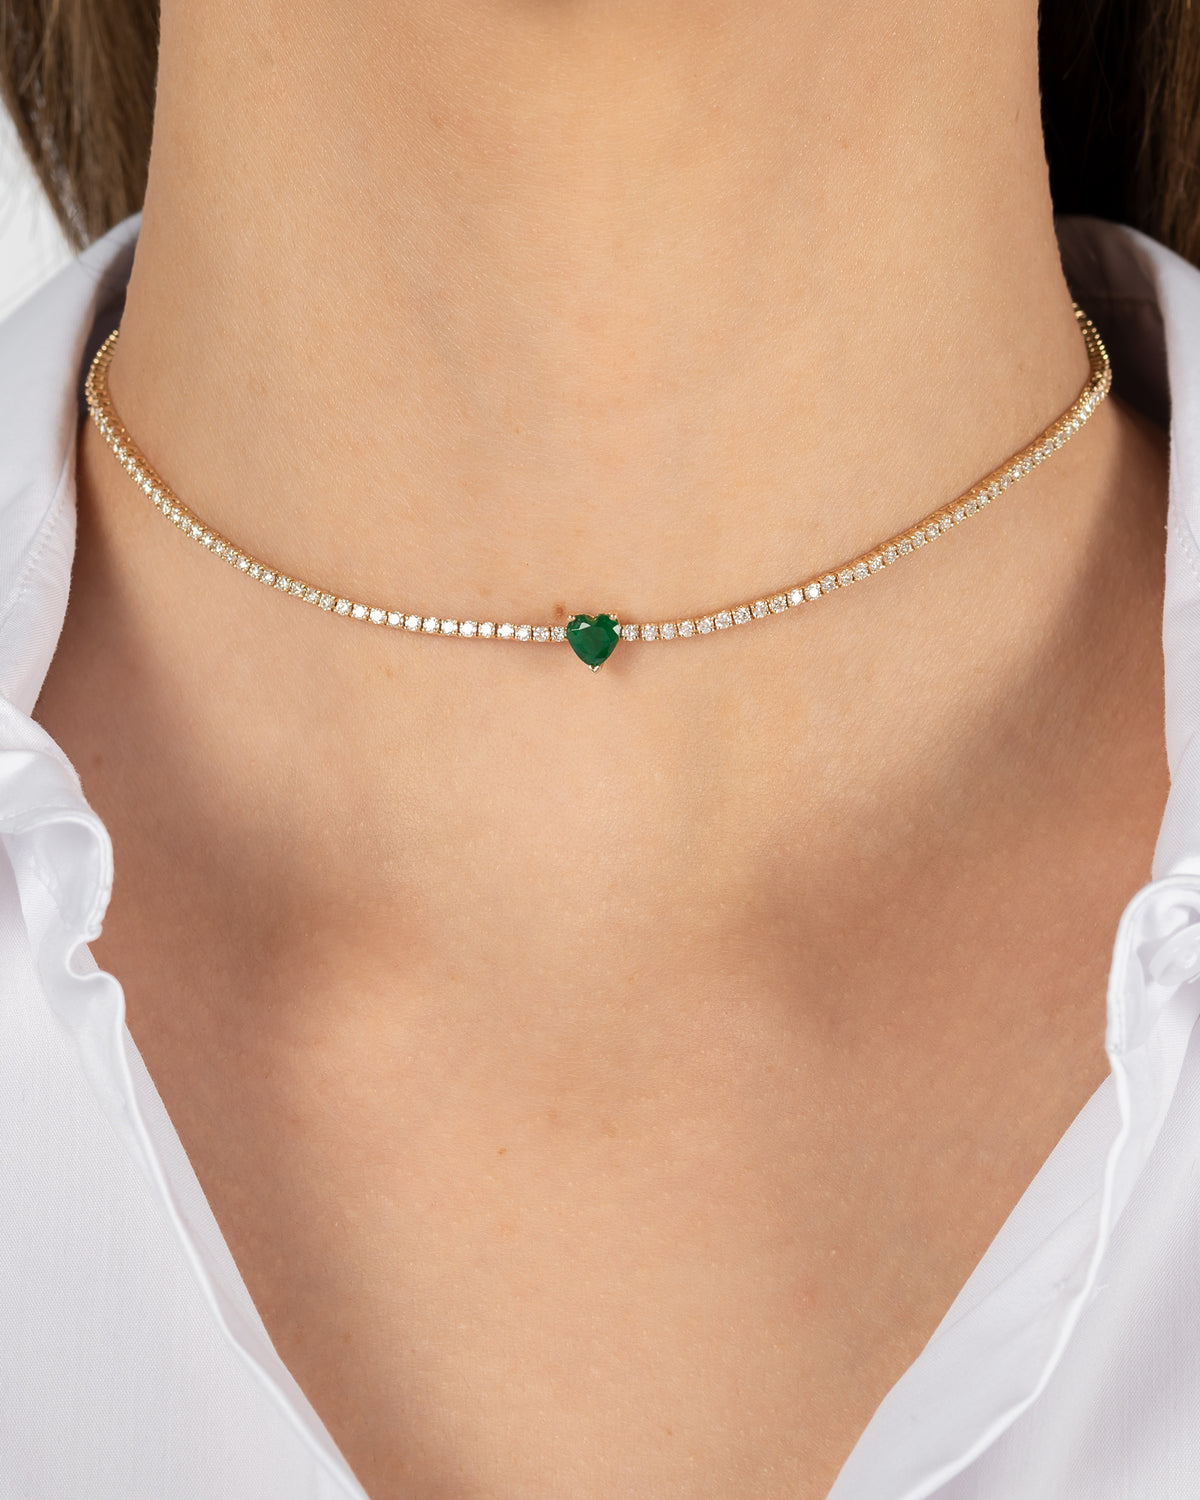 4 Prong Diamond Tennis Necklace with Heart Cut Emerald